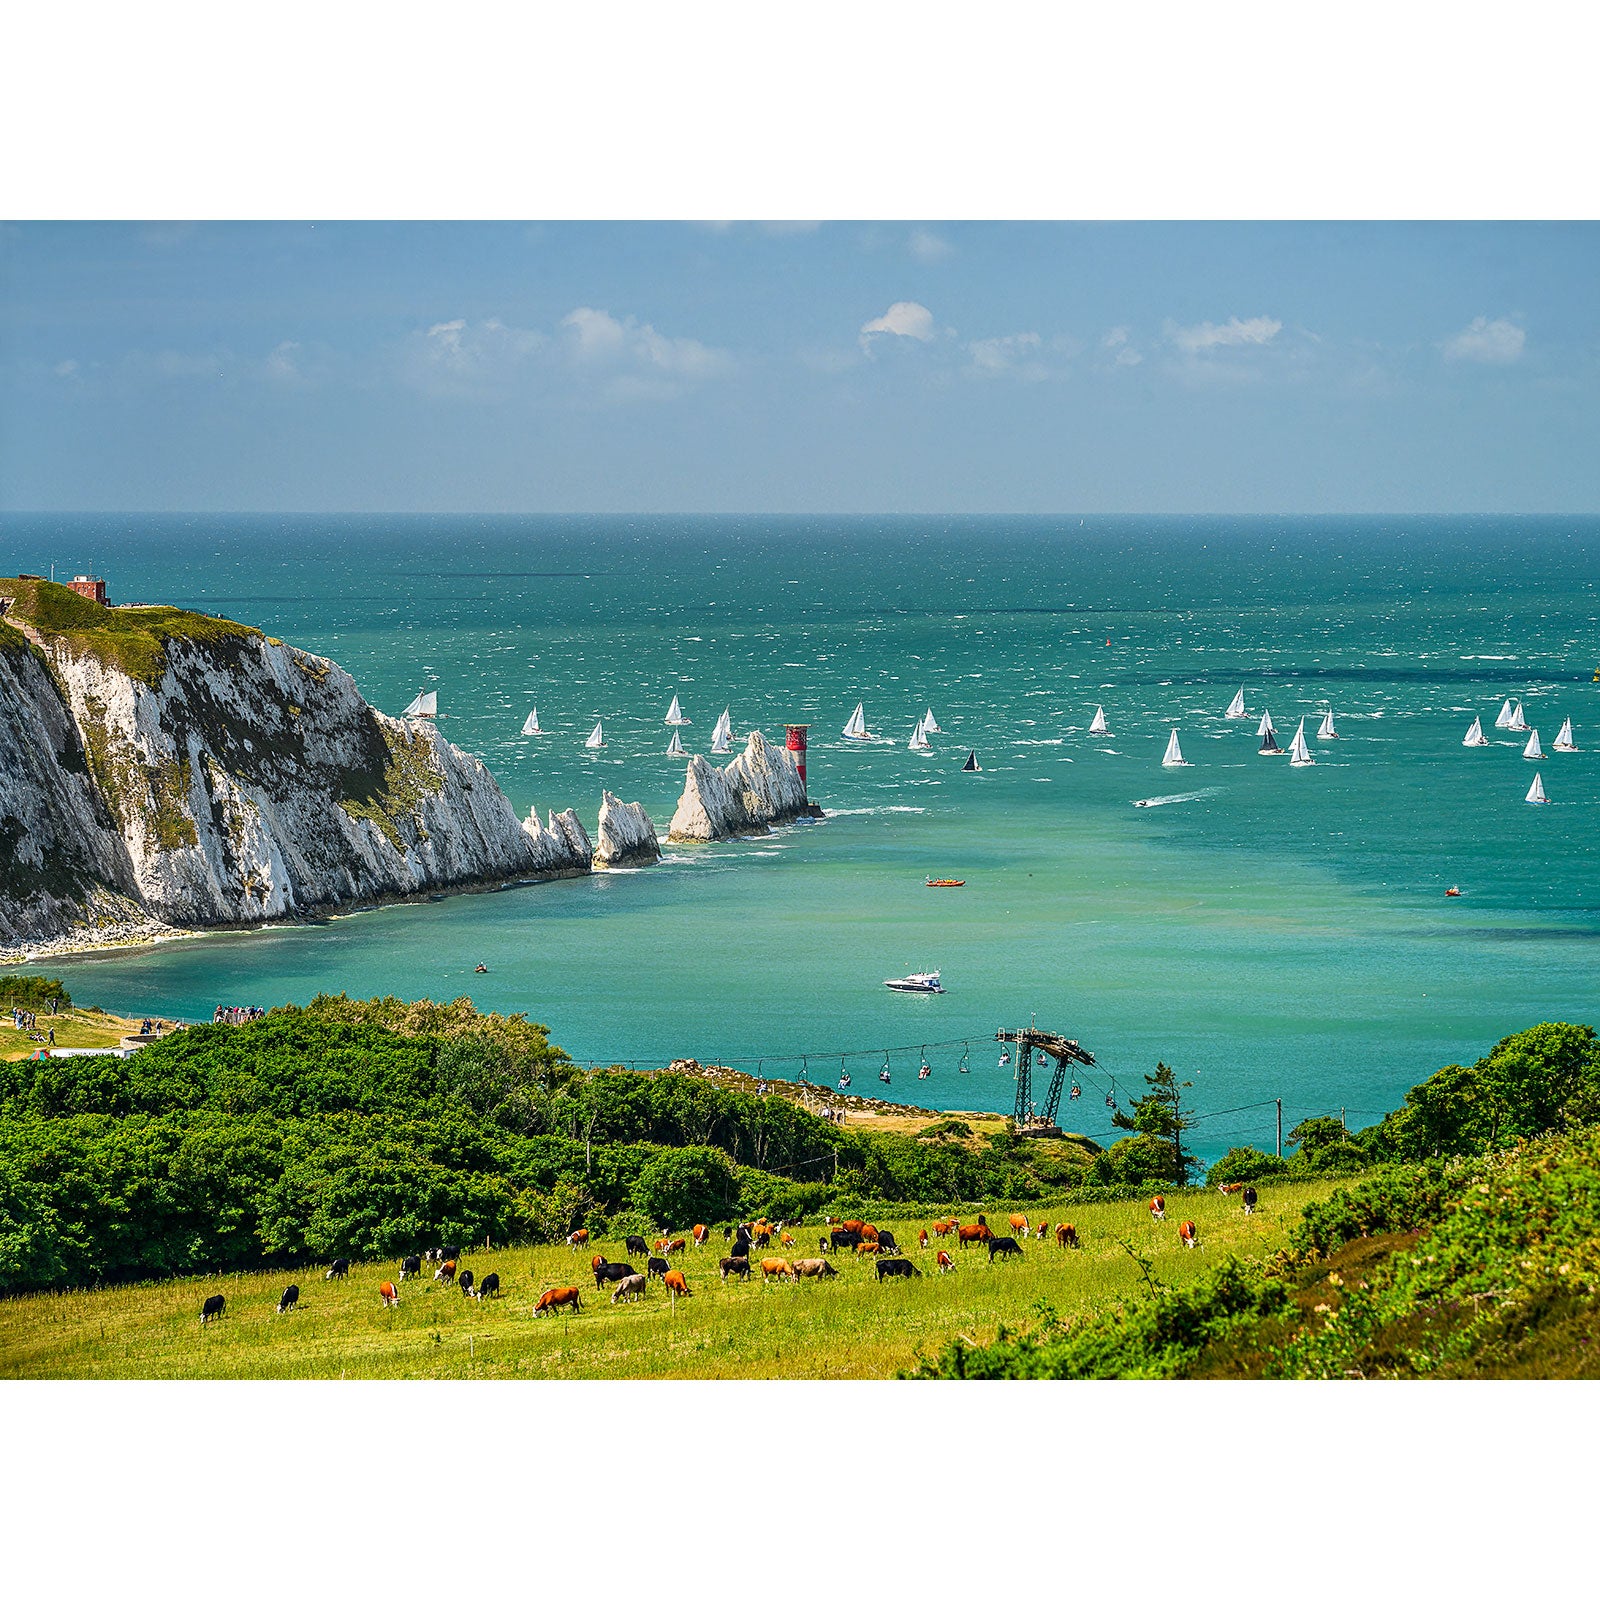 Sailboats racing off the coast of the Isle of Wight with white cliffs, green hills, and grazing cattle in the foreground captured by The Needles from Available Light Photography.